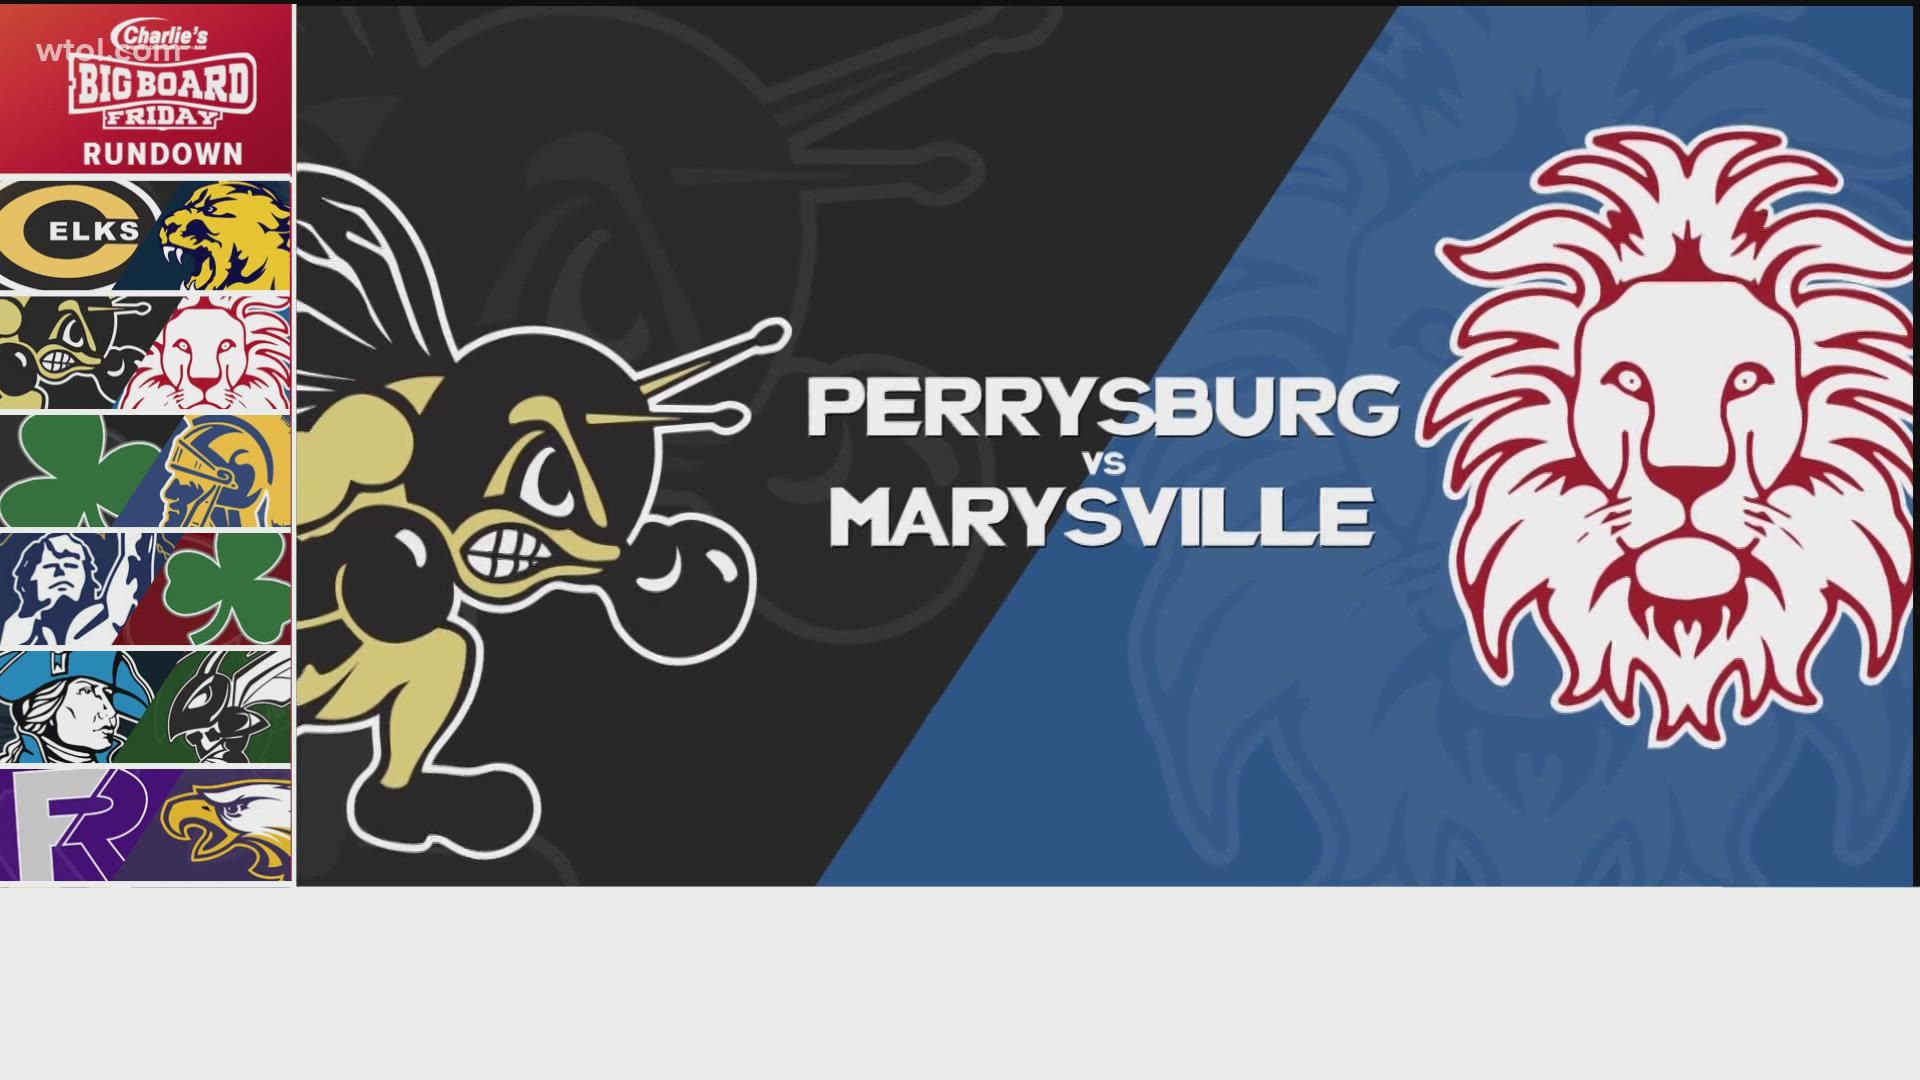 Staying in OHSAA Division I, Perrysburg a huge win last week. Tonight, taking to the road against unbeaten Marysville who is #2 in Ohio.